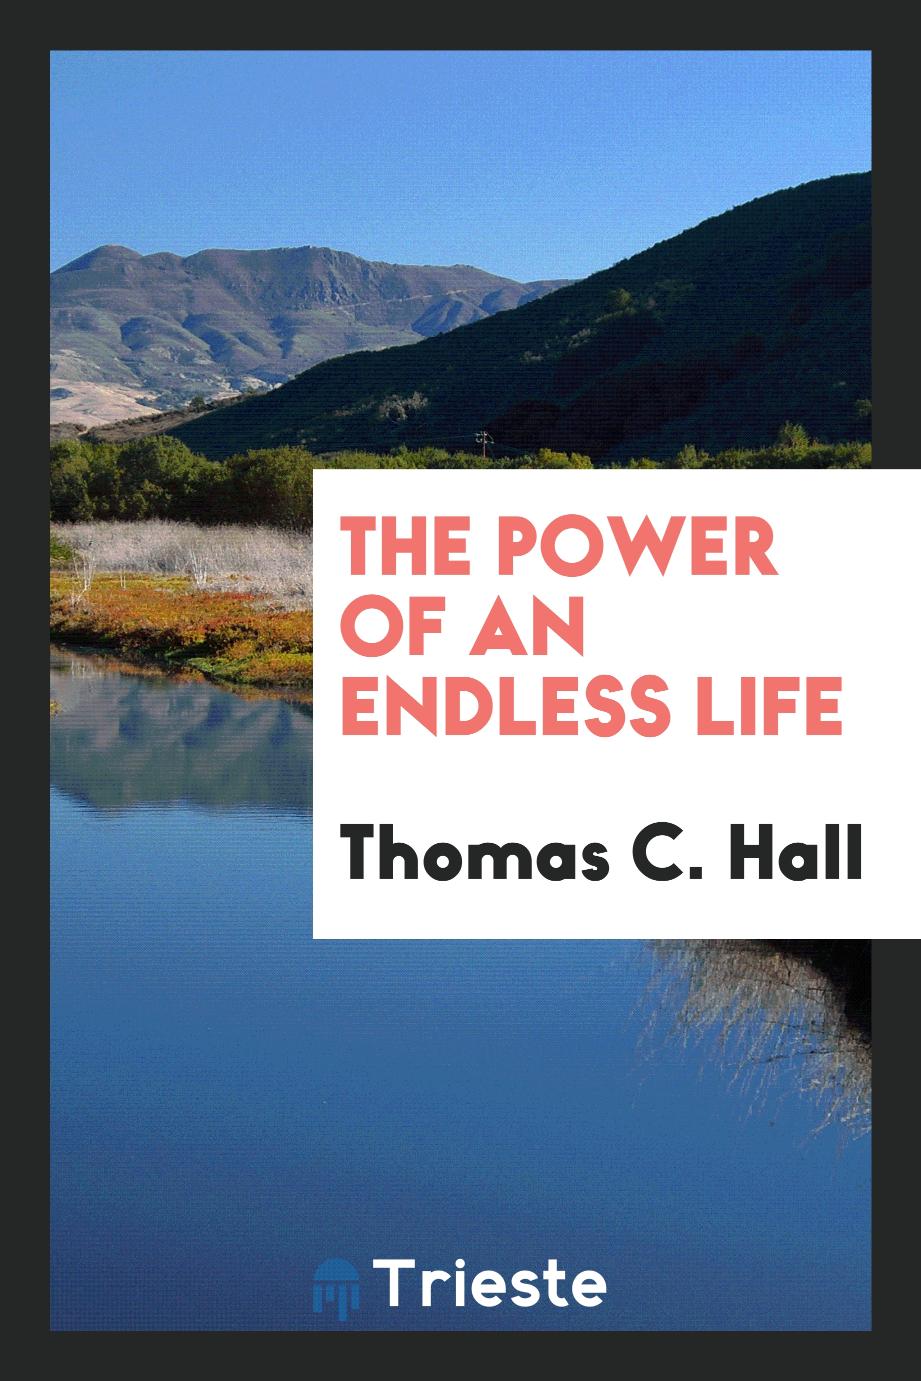 The power of an endless life